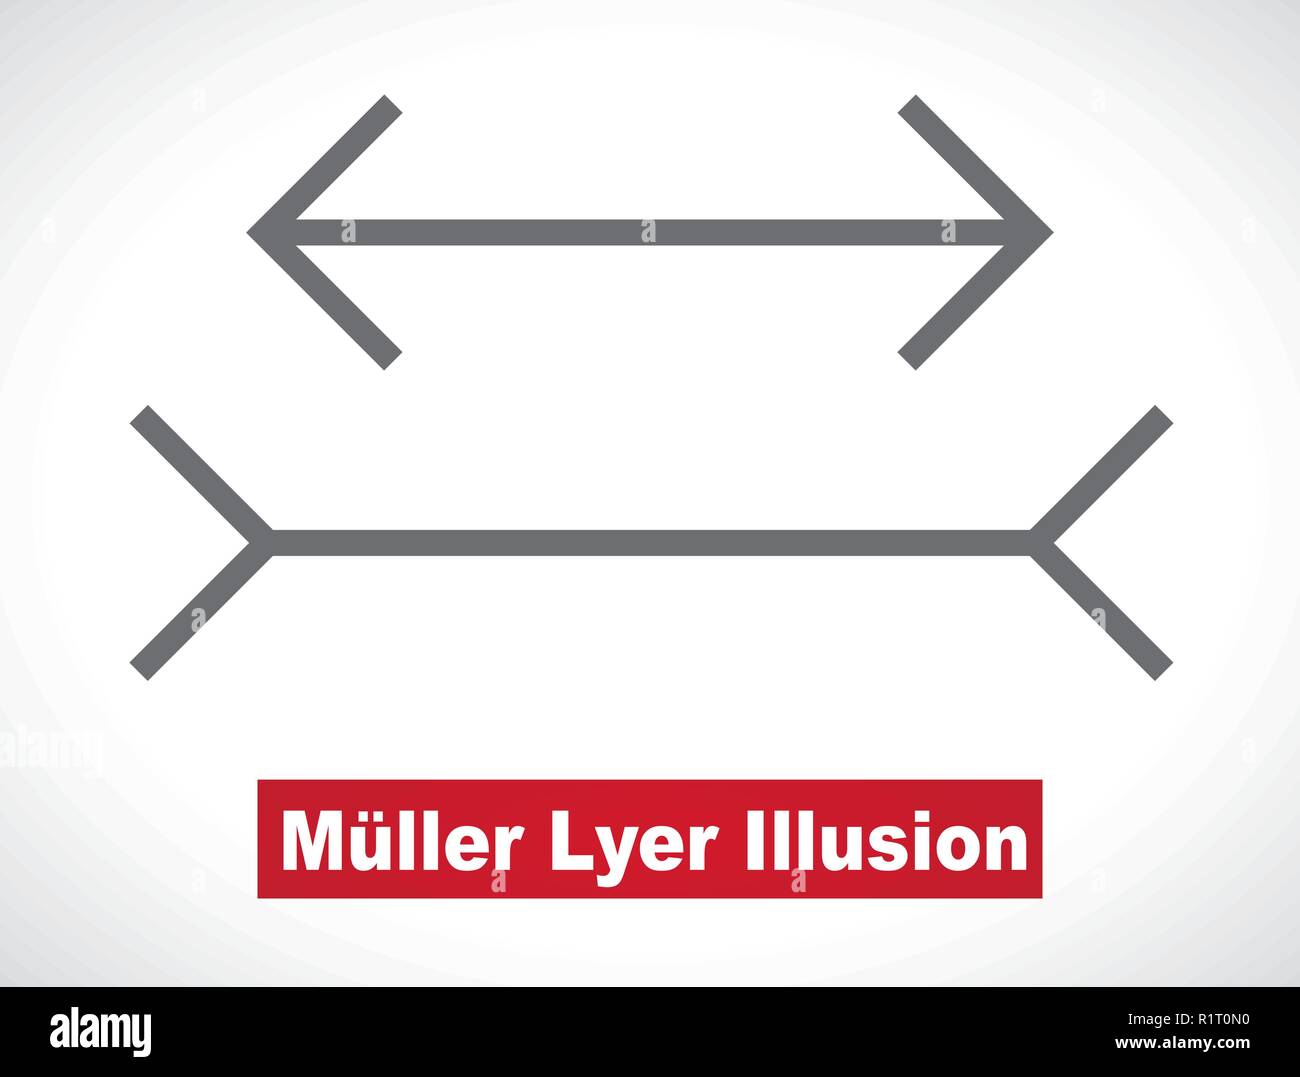 Muller Lyer Illusion High Resolution Stock Photography And Images Alamy